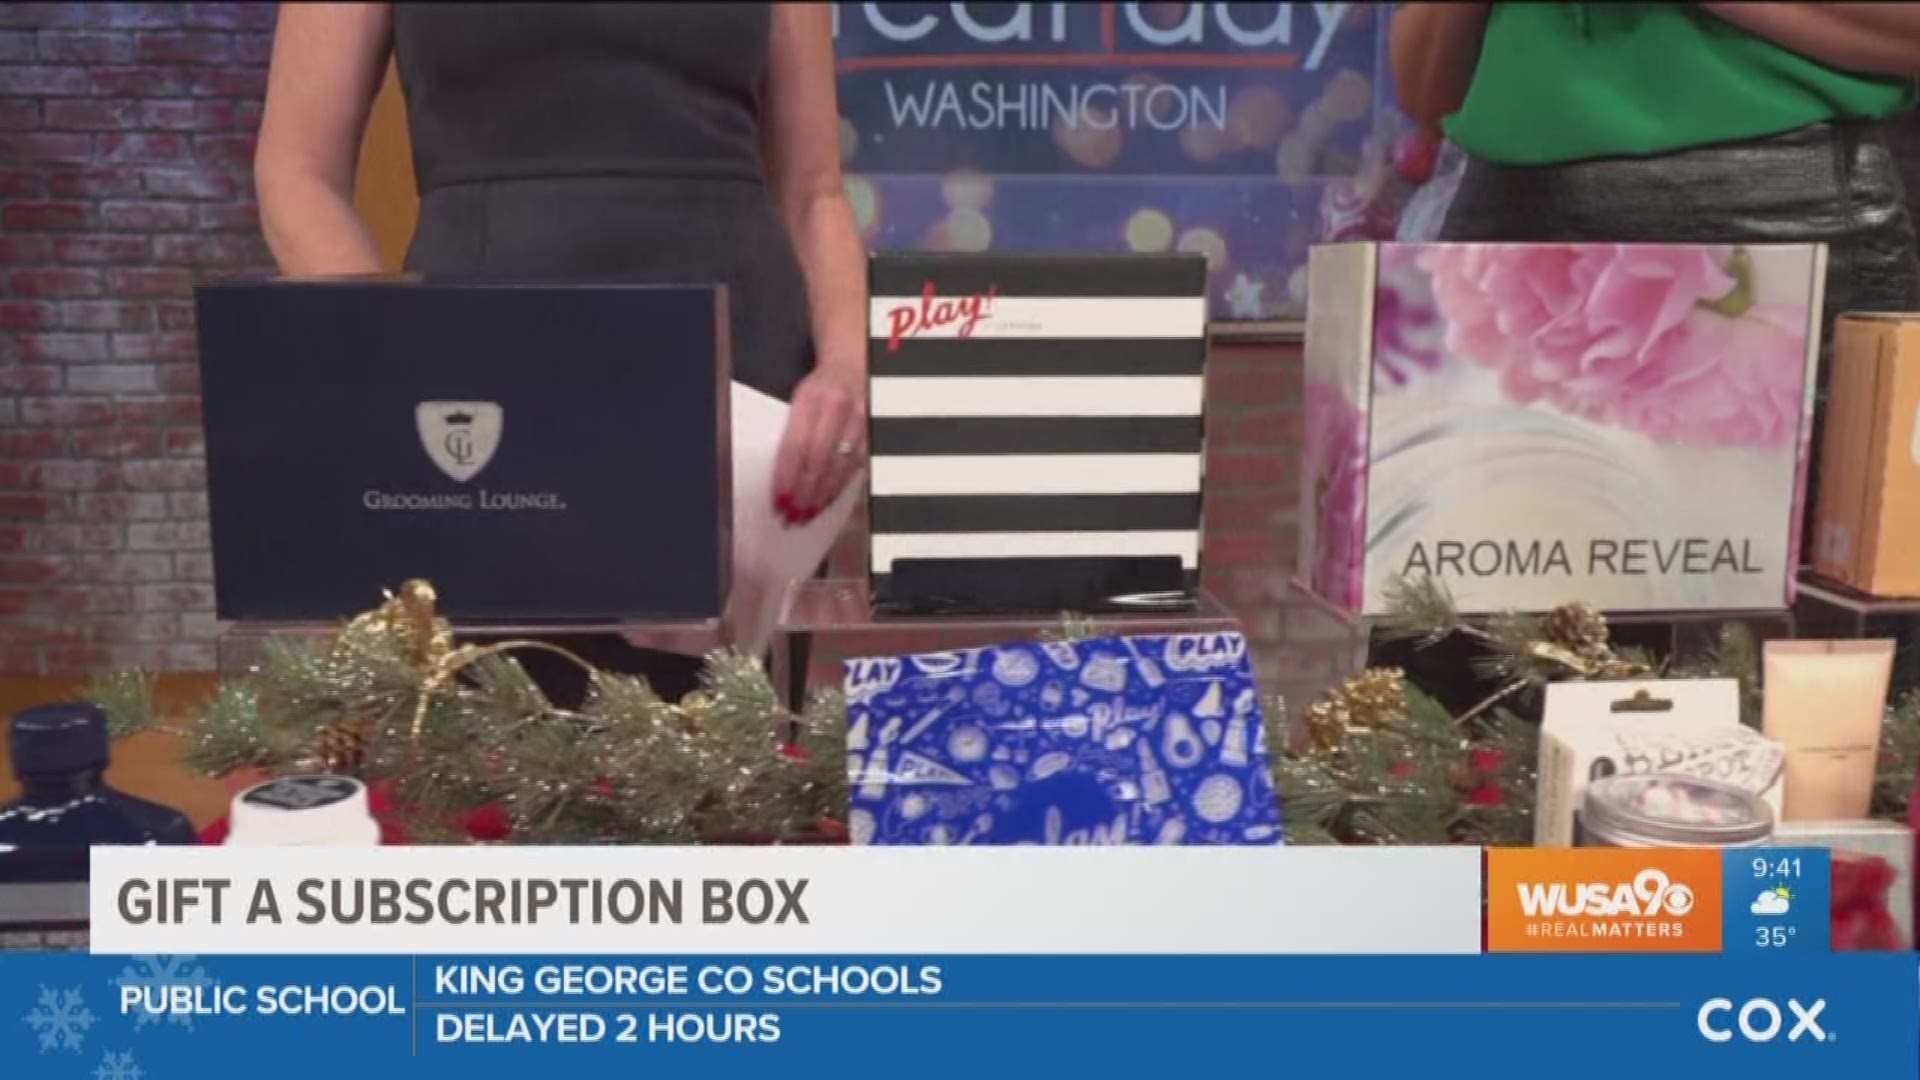 Mary Beth Olson, host of 'The Mamas' Show shares great holiday gift ideas -- subscription boxes!